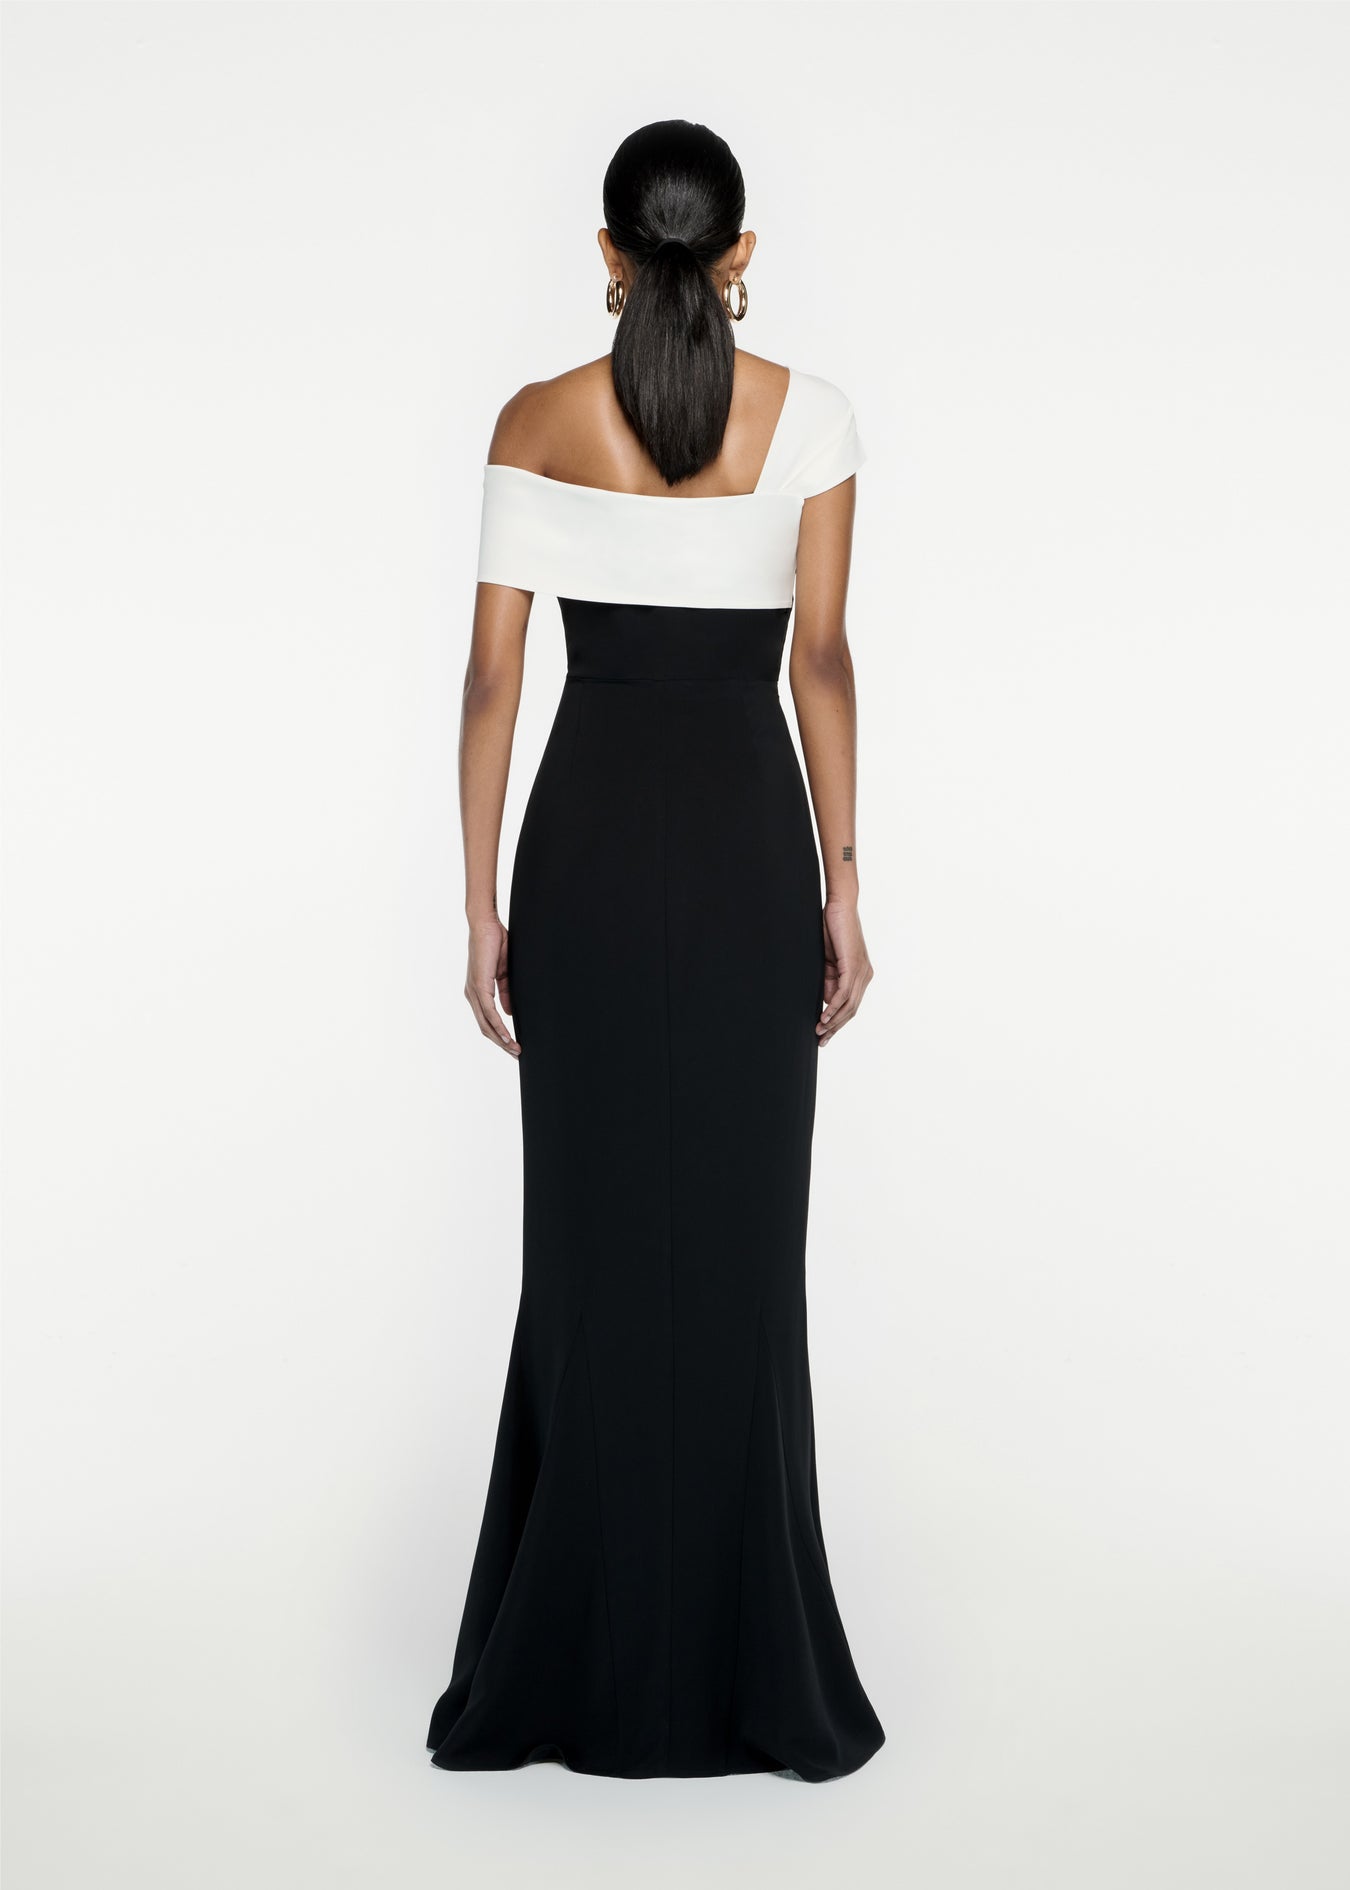 The back of a woman wearing the Asymmetric Stretch Cady Maxi Dress in Monochrome